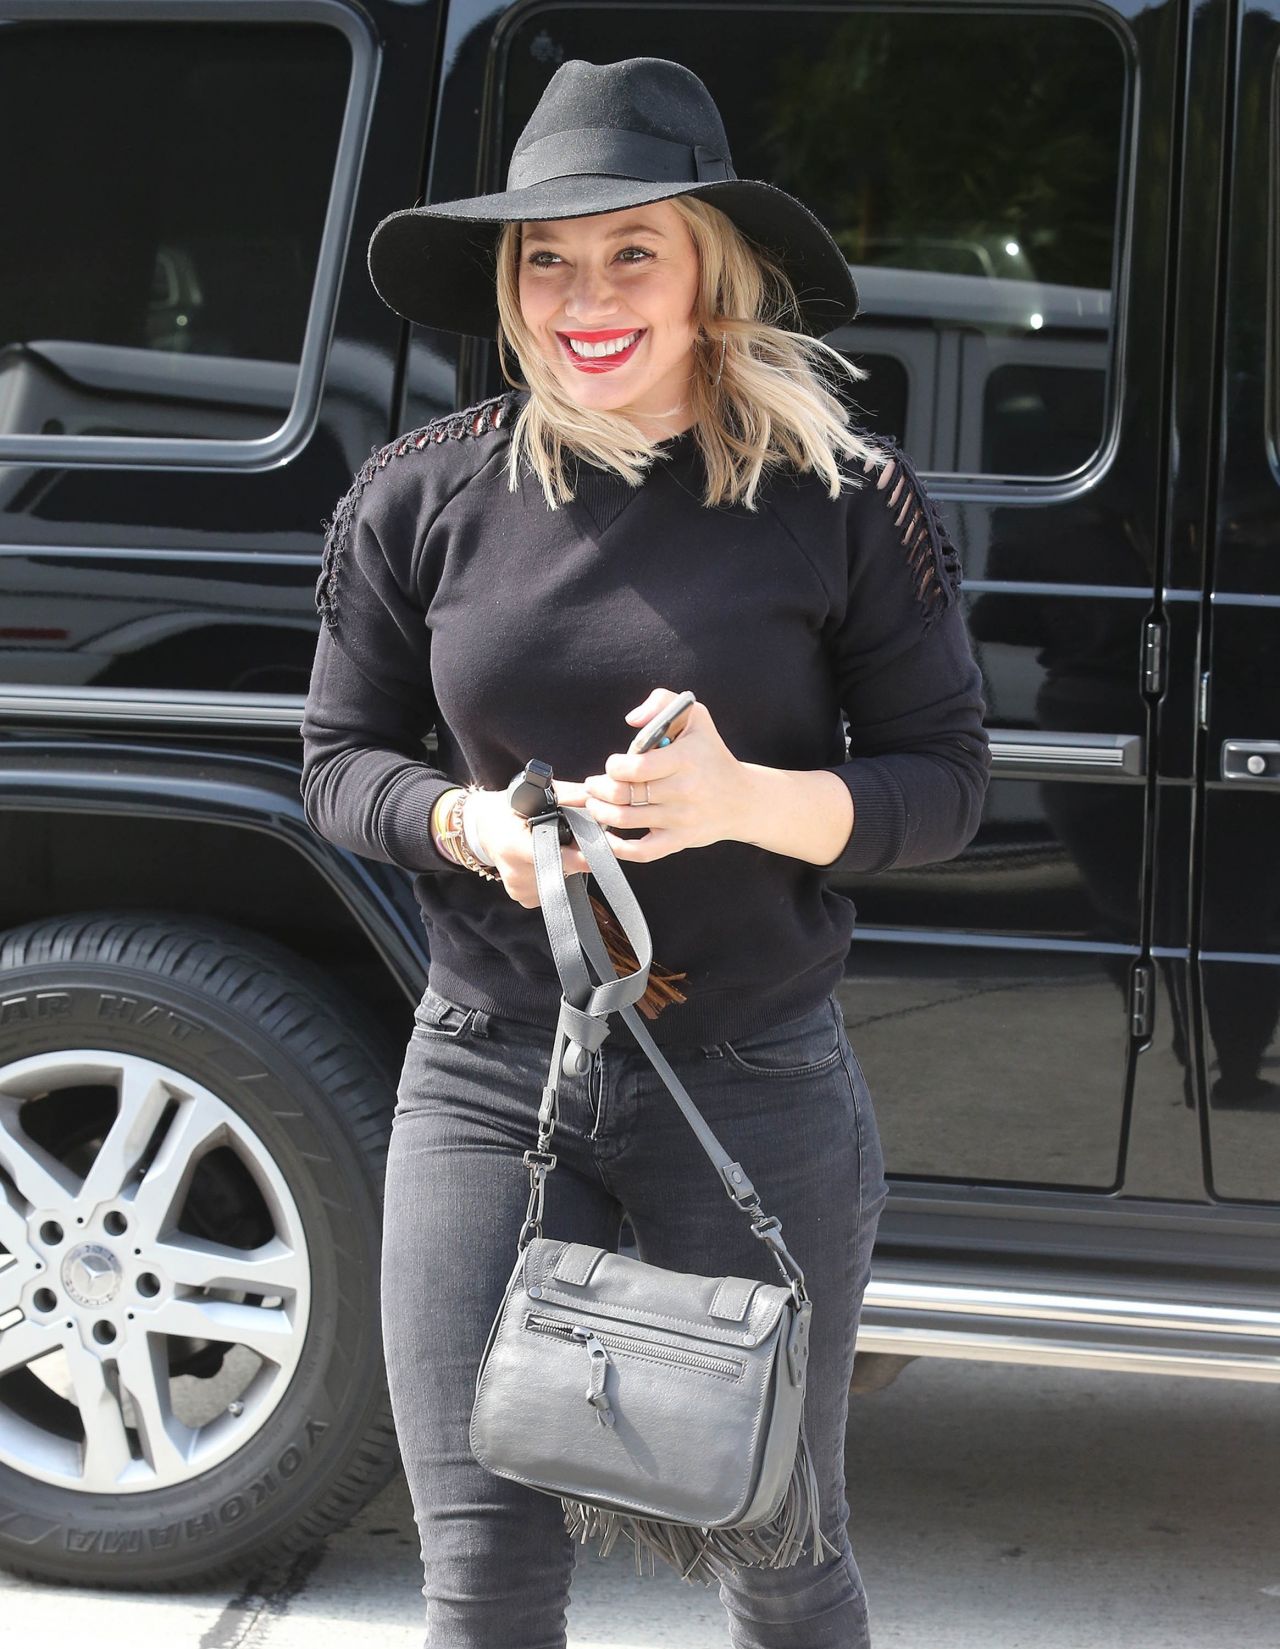 hilary-duff-in-tight-jeans-out-in-west-hollywood-may-2015_9.